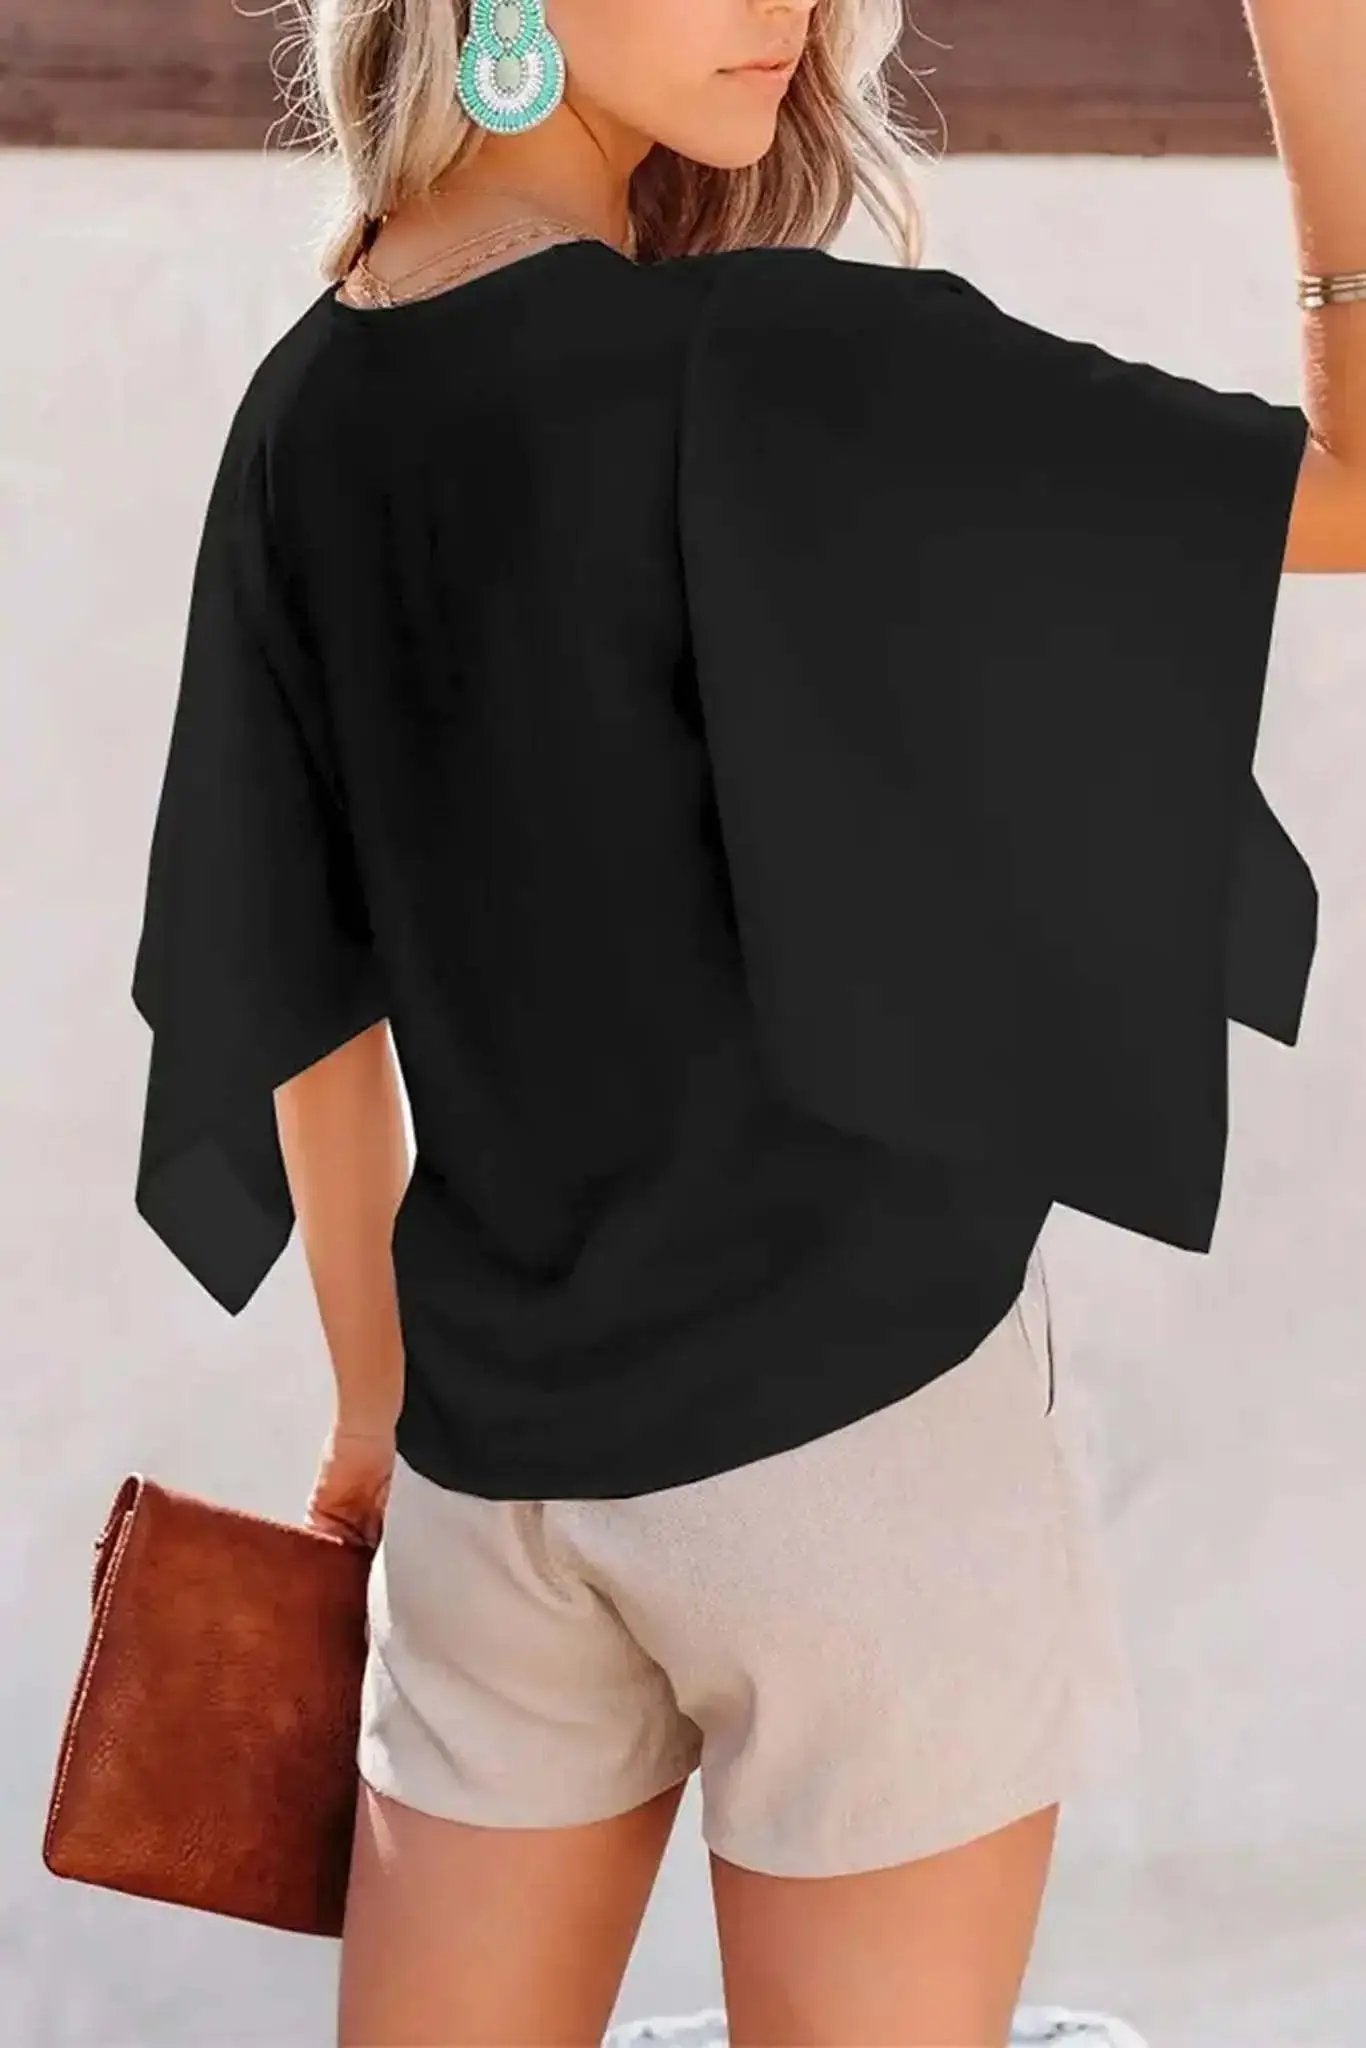 Woman in a black V-neck top with flare sleeves and distressed denim shorts holding a brown clutch from Don't Be Chy Boutique.